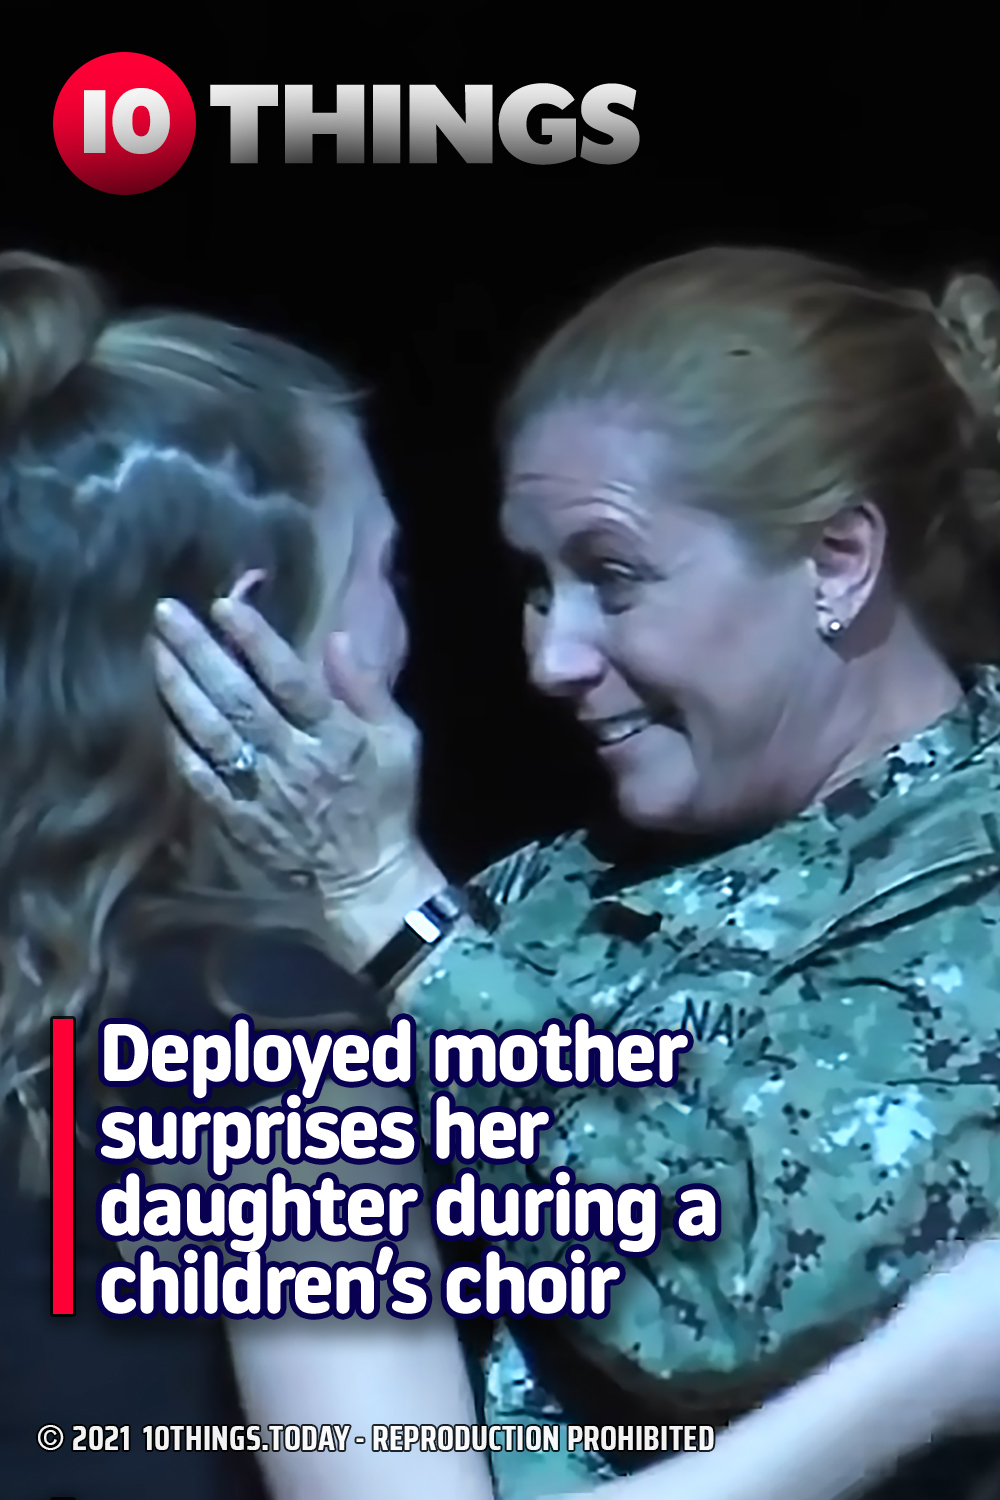 Deployed mother surprises her daughter during a children’s choir